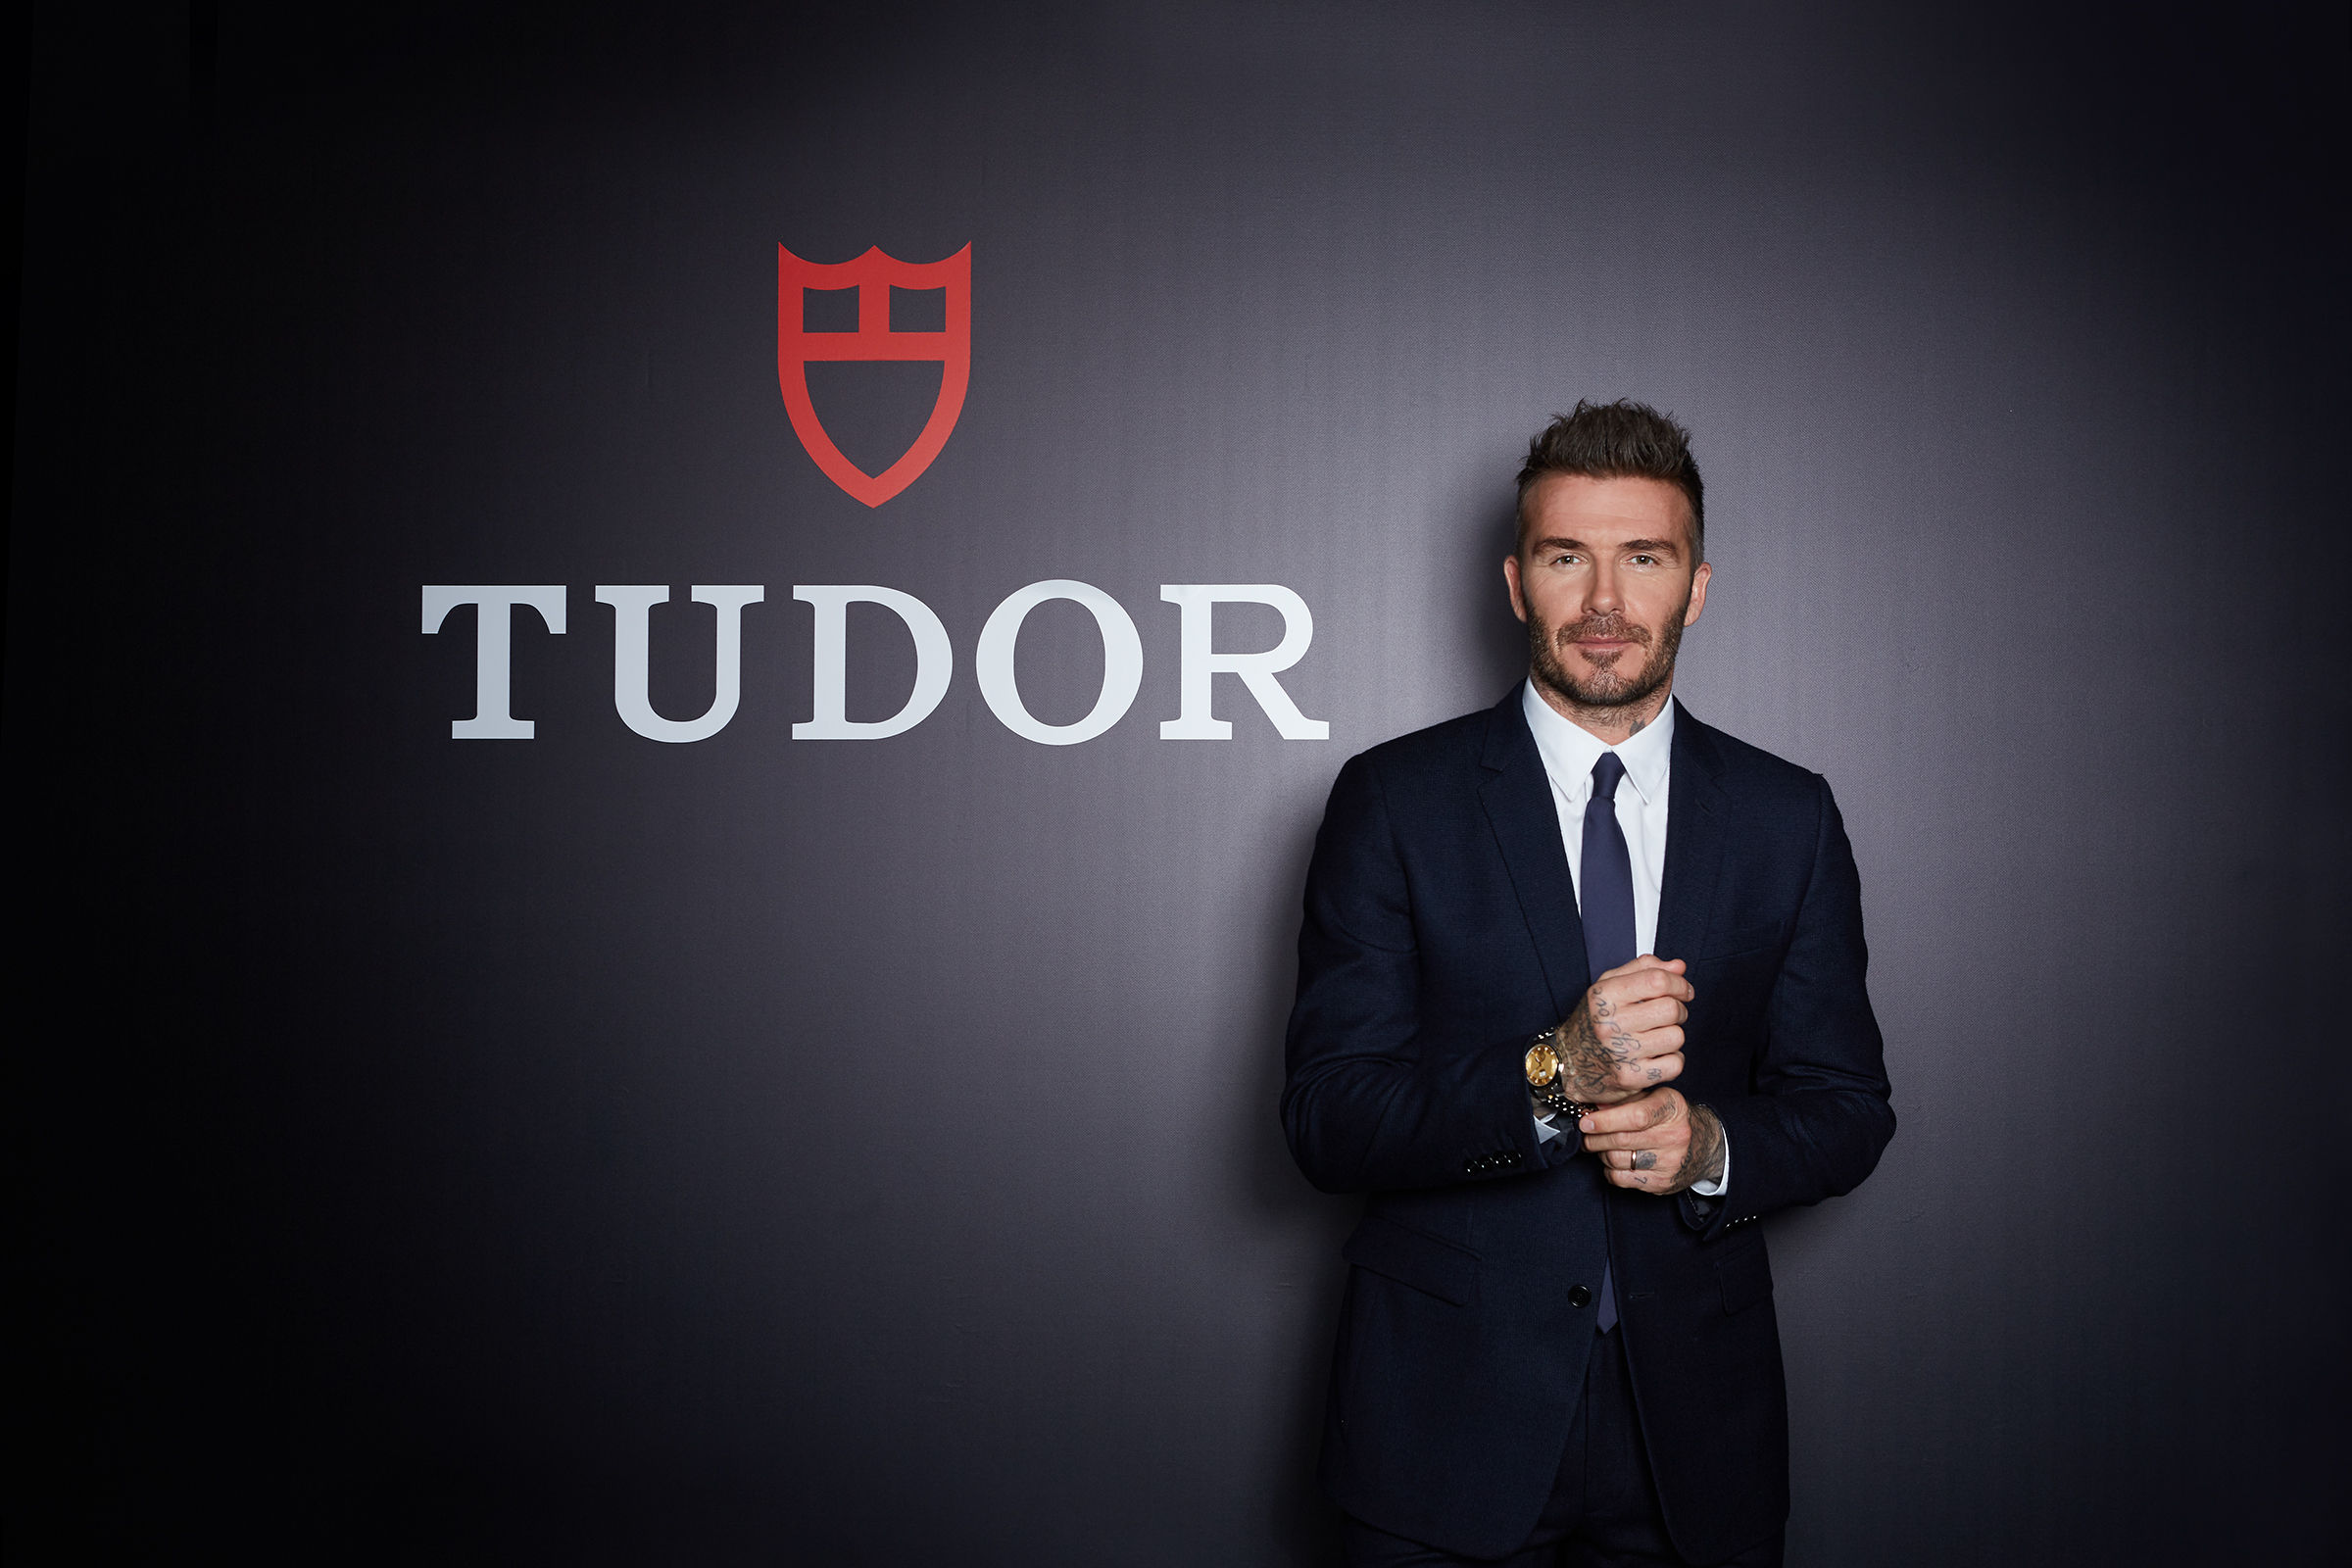 Gallery: Tudor Launches New Timepieces with David Beckham